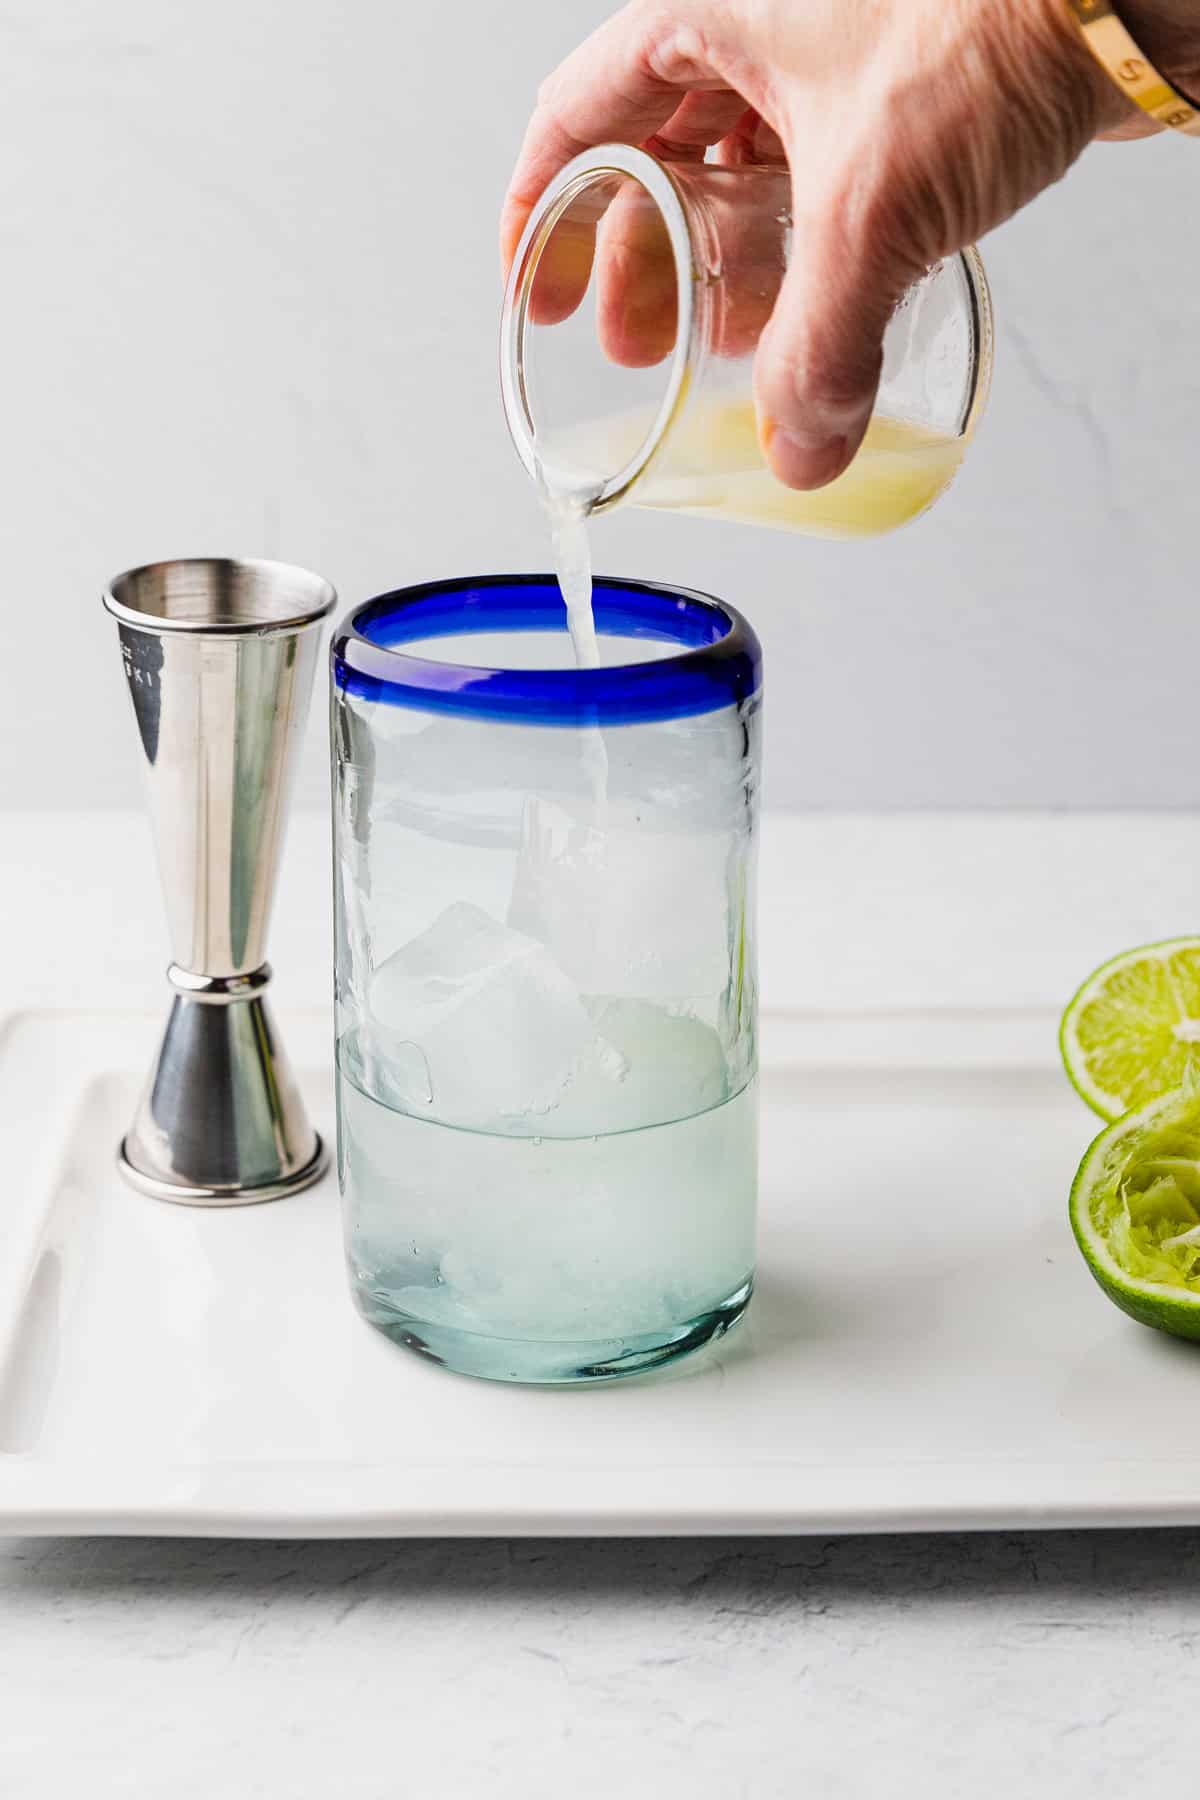 Pour lime into glass.